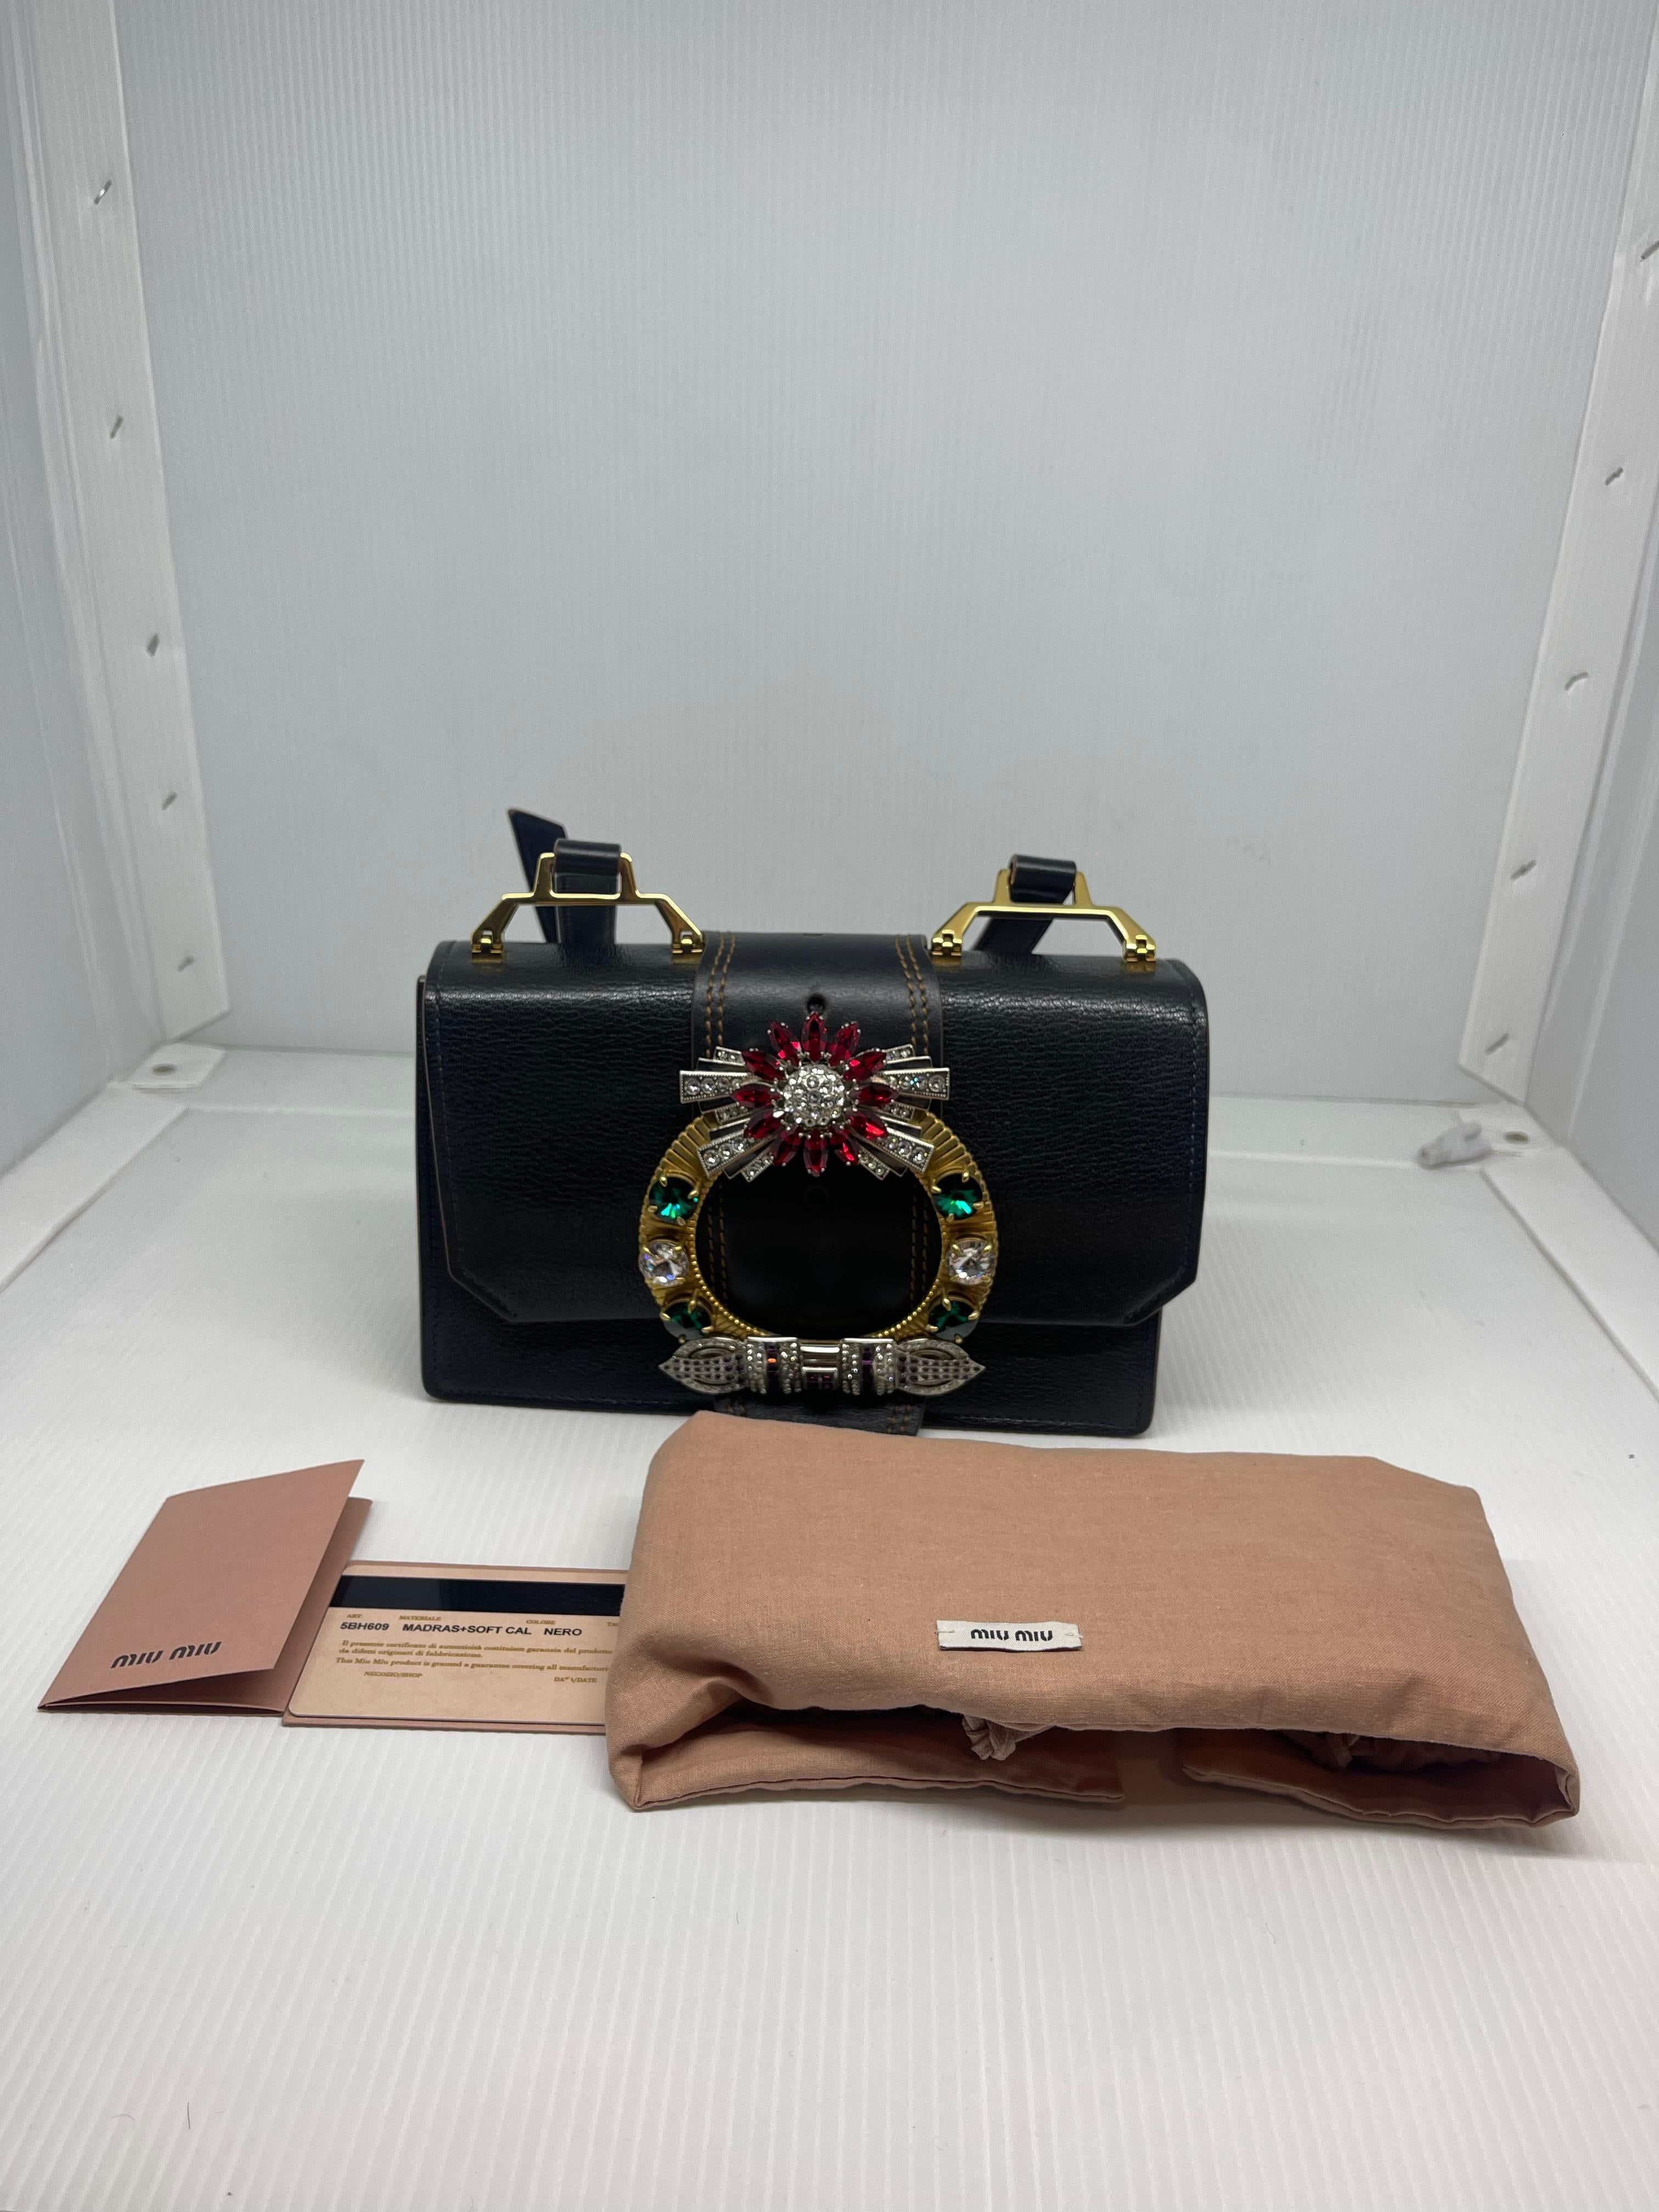 Miu miu madras jewel embellished crossbody bag in black leather. Overall still in great condition, faint scratches on the leather surface as seen on pictures and faint tarnishing on the embellishments. Suede lining shows minor rubbing. Comes with